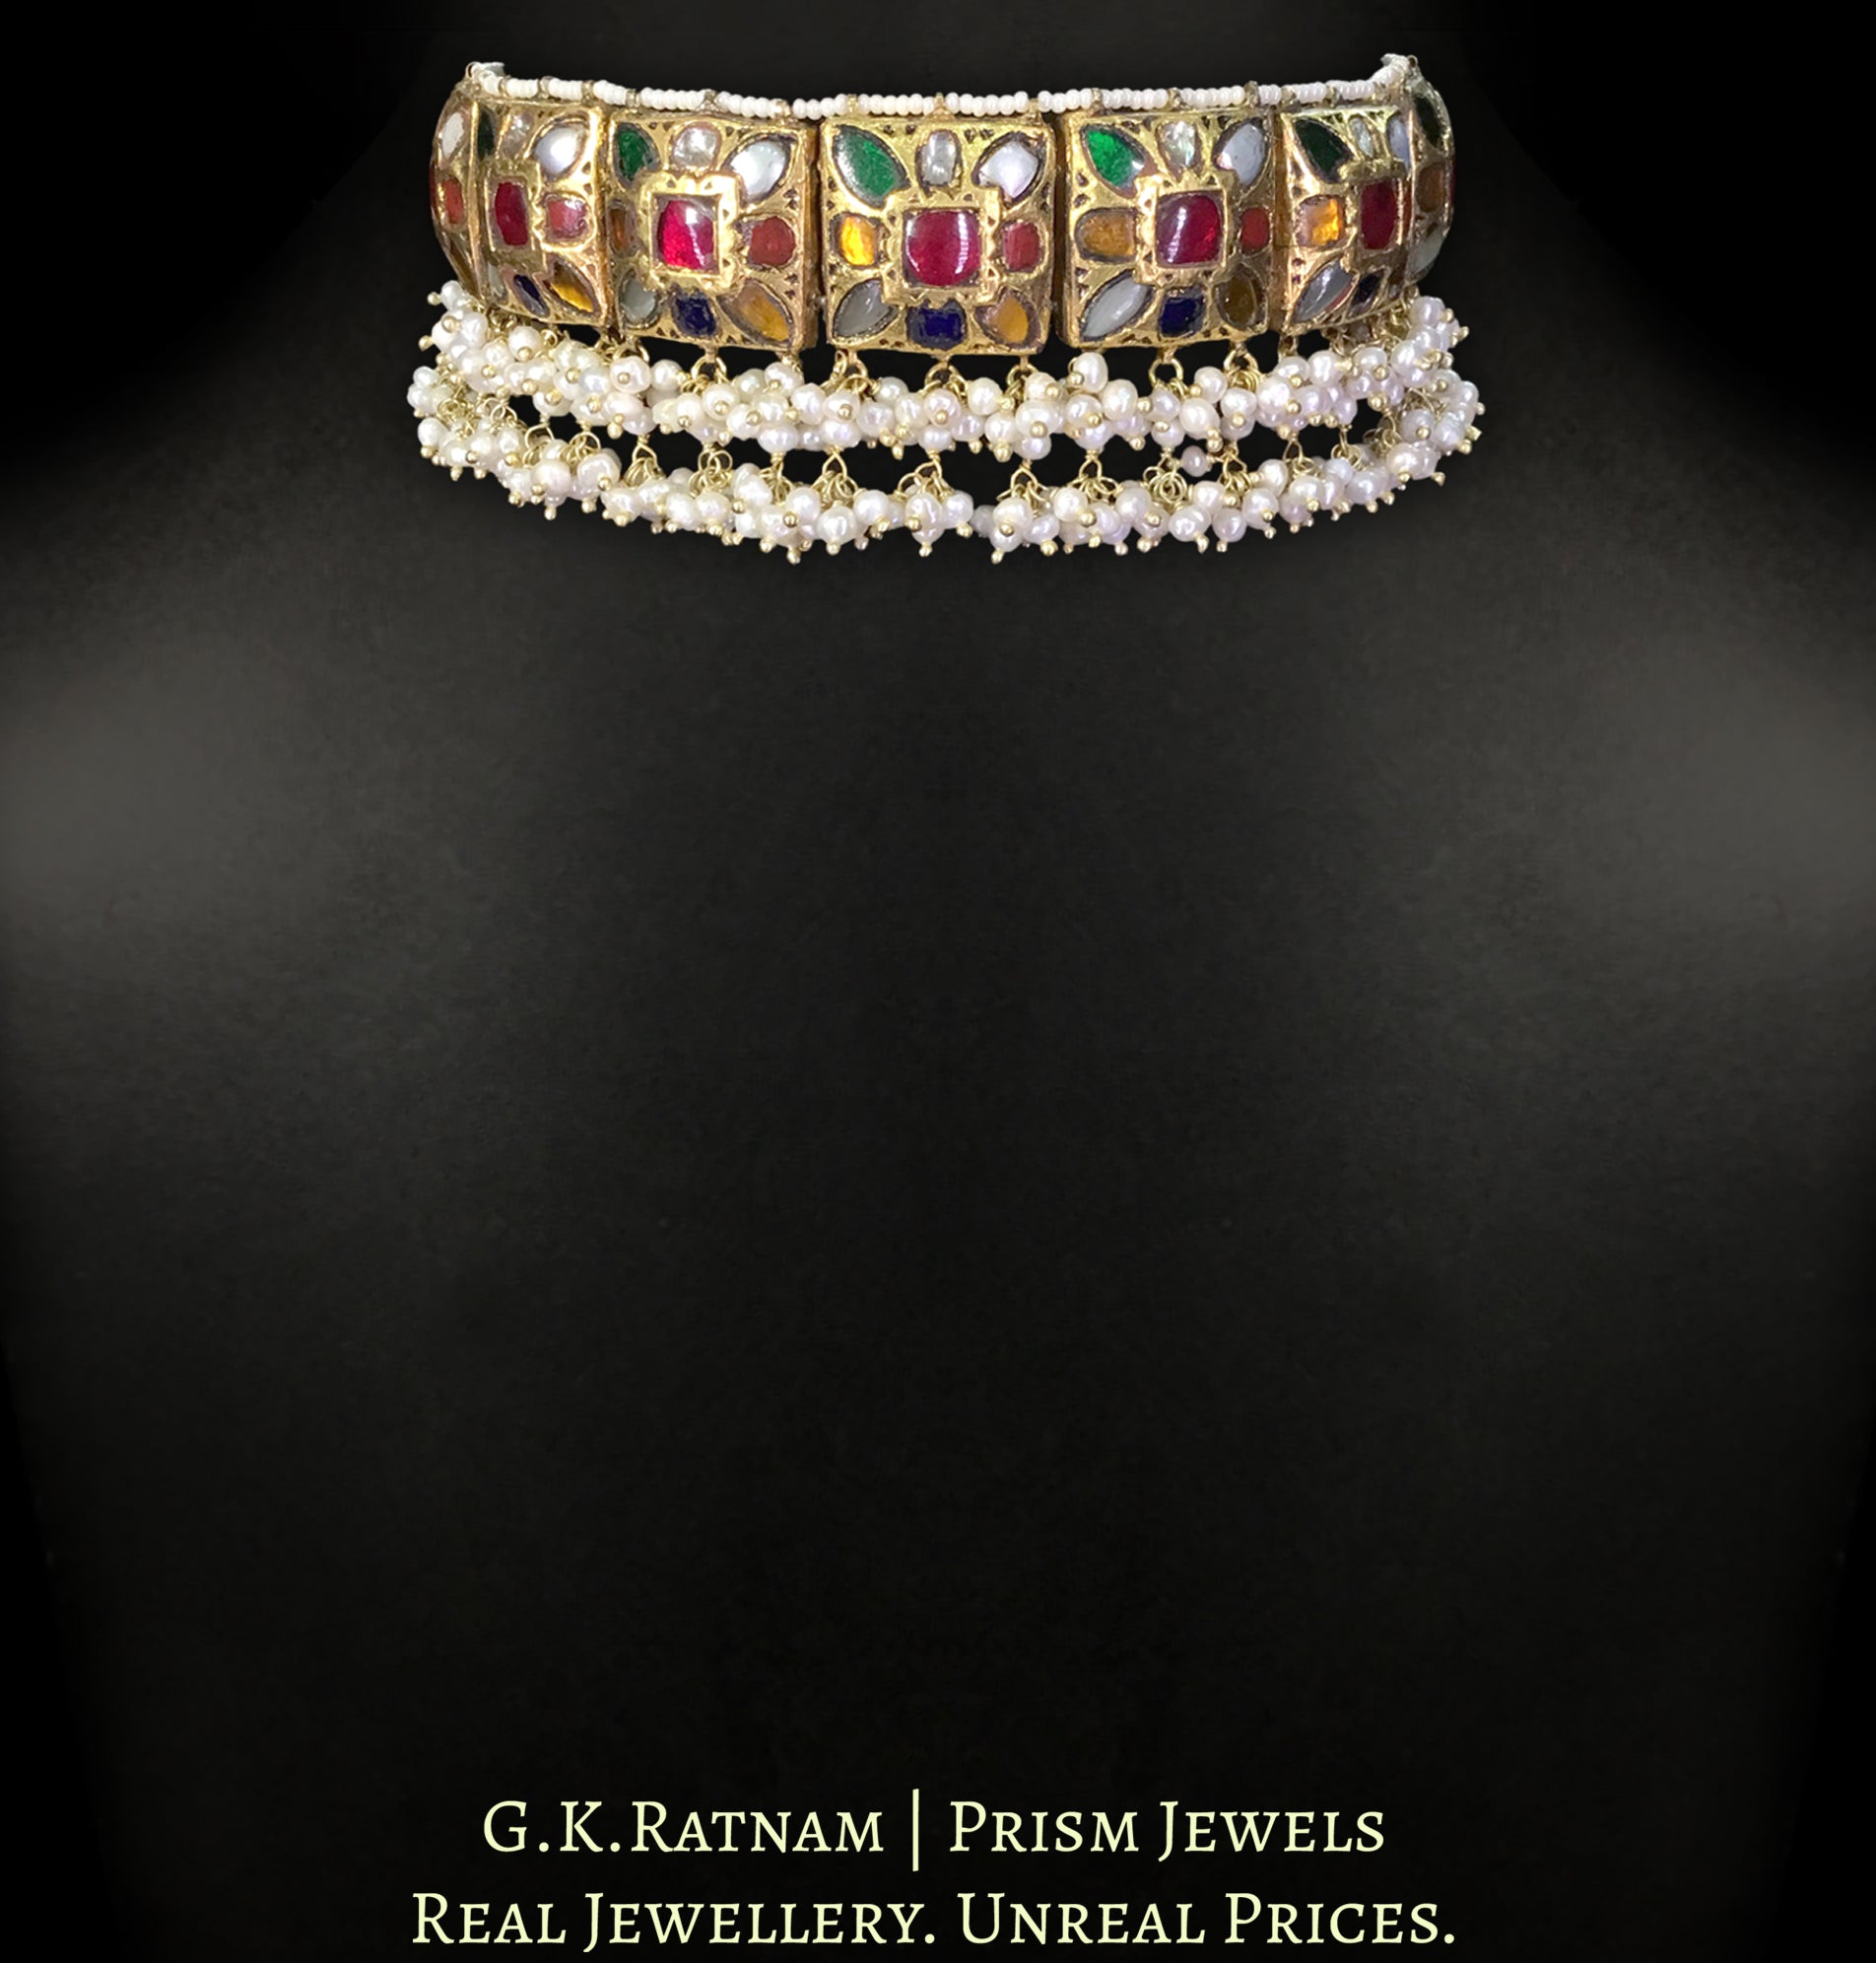 23k Gold and Diamond Polki double-sided Navratna Choker Necklace with Pearl Bunches